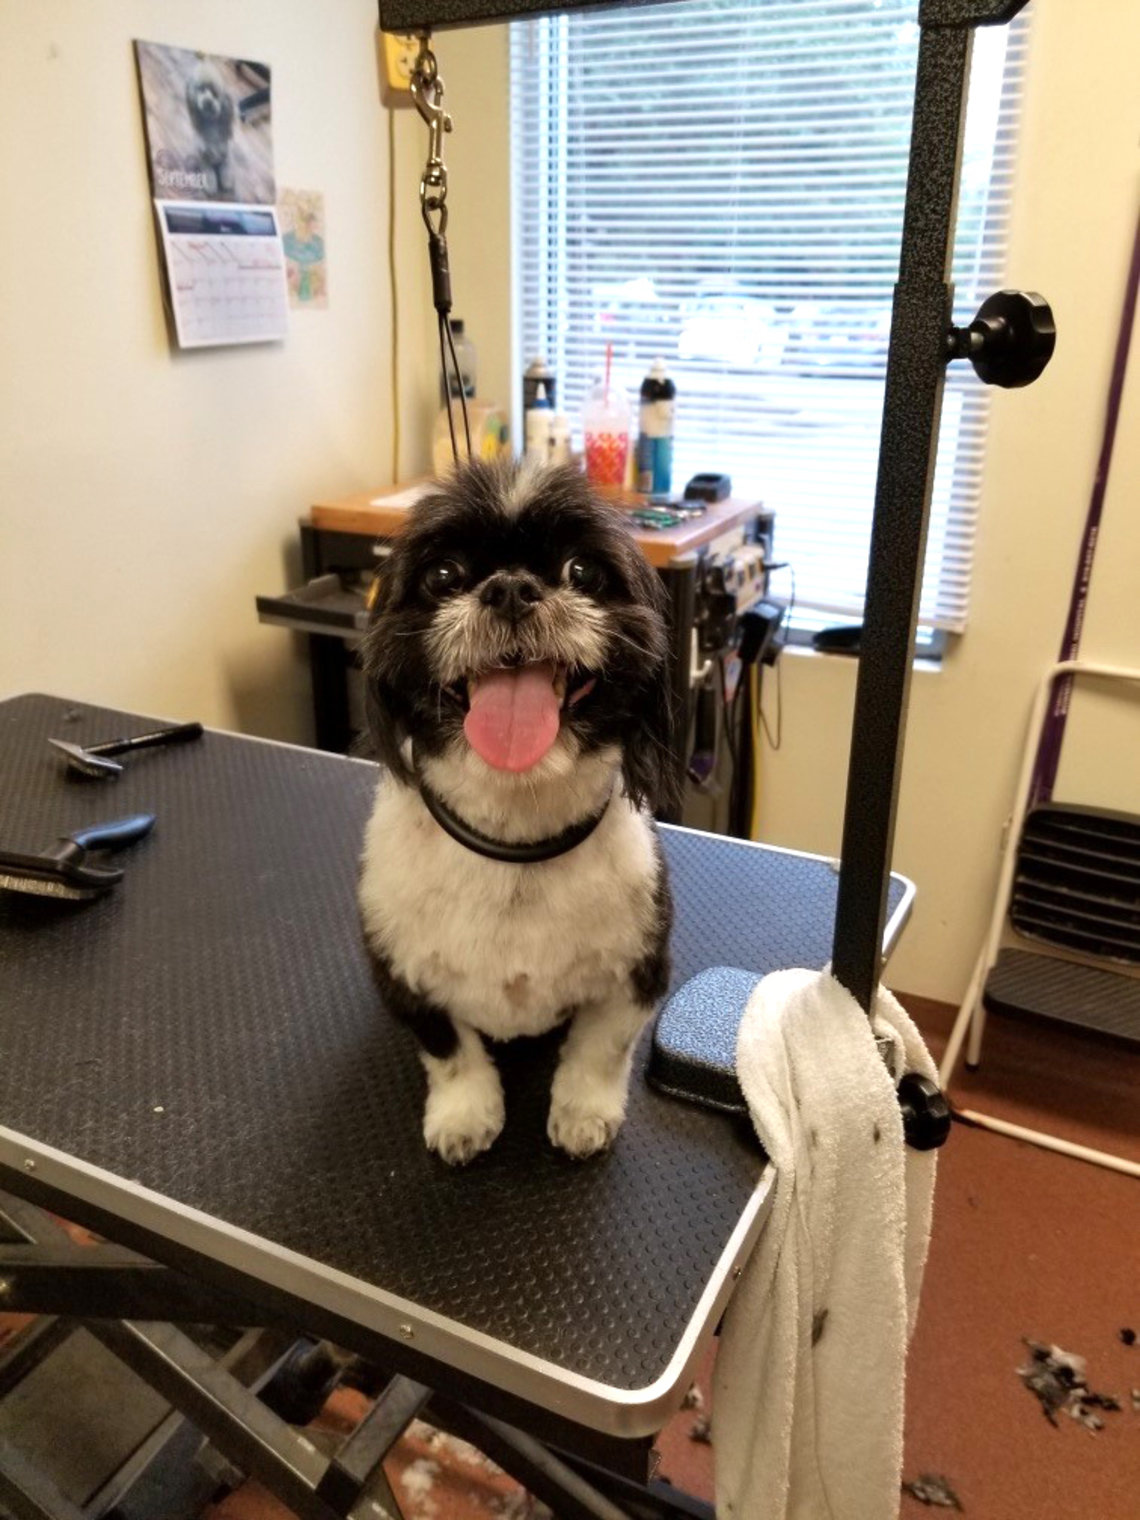 A black and white pup with her tongue sticking out sits on a work table.